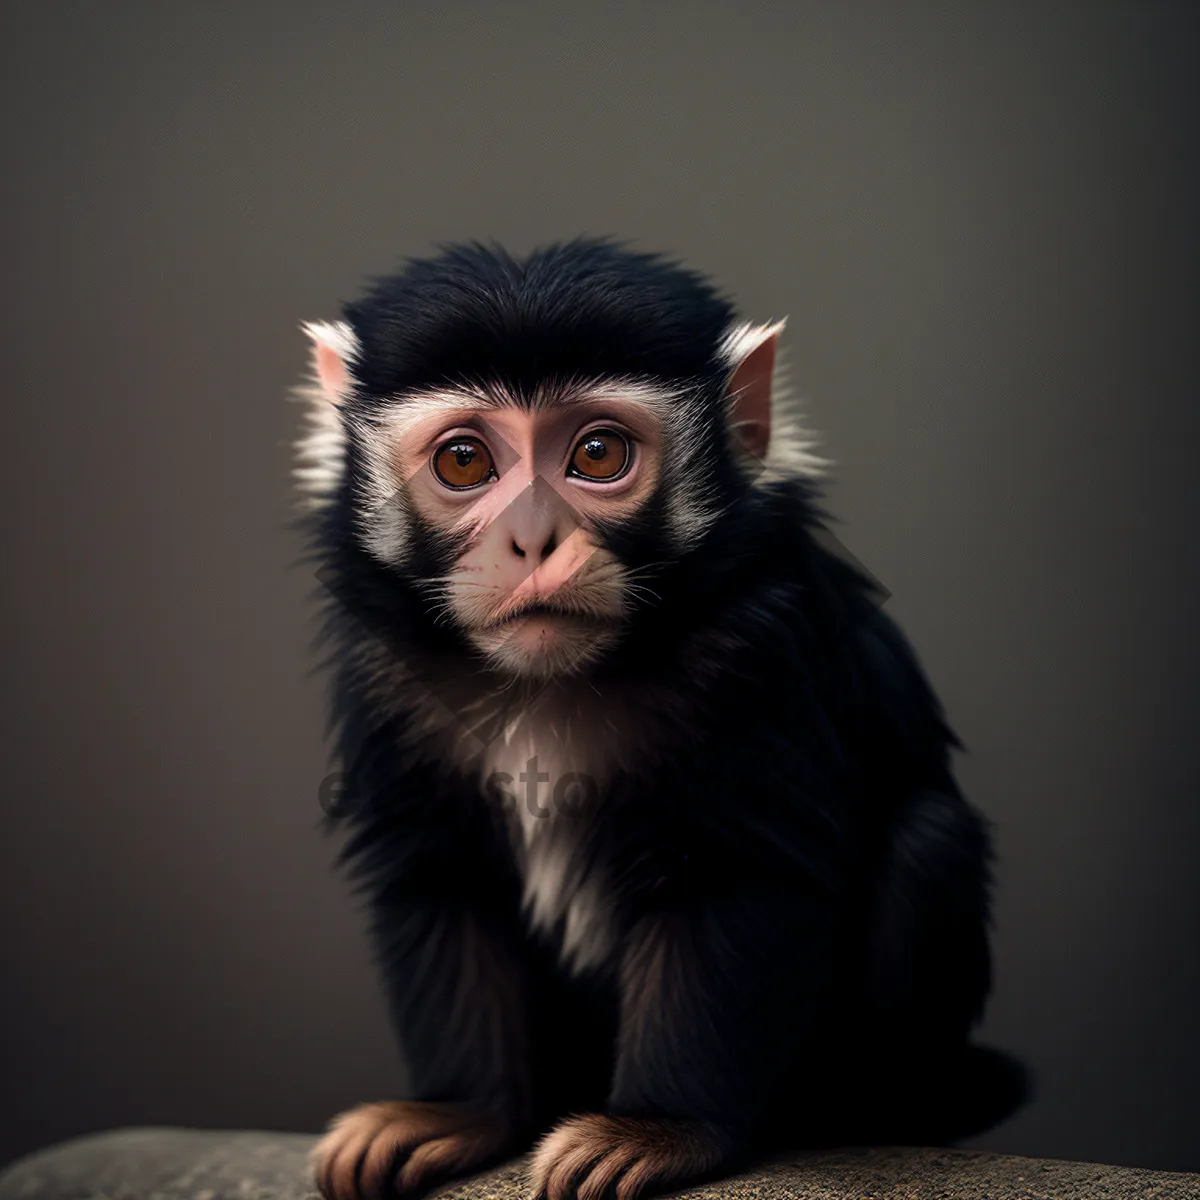 Picture of Cute Baby Monkey Portrait with Furry Face